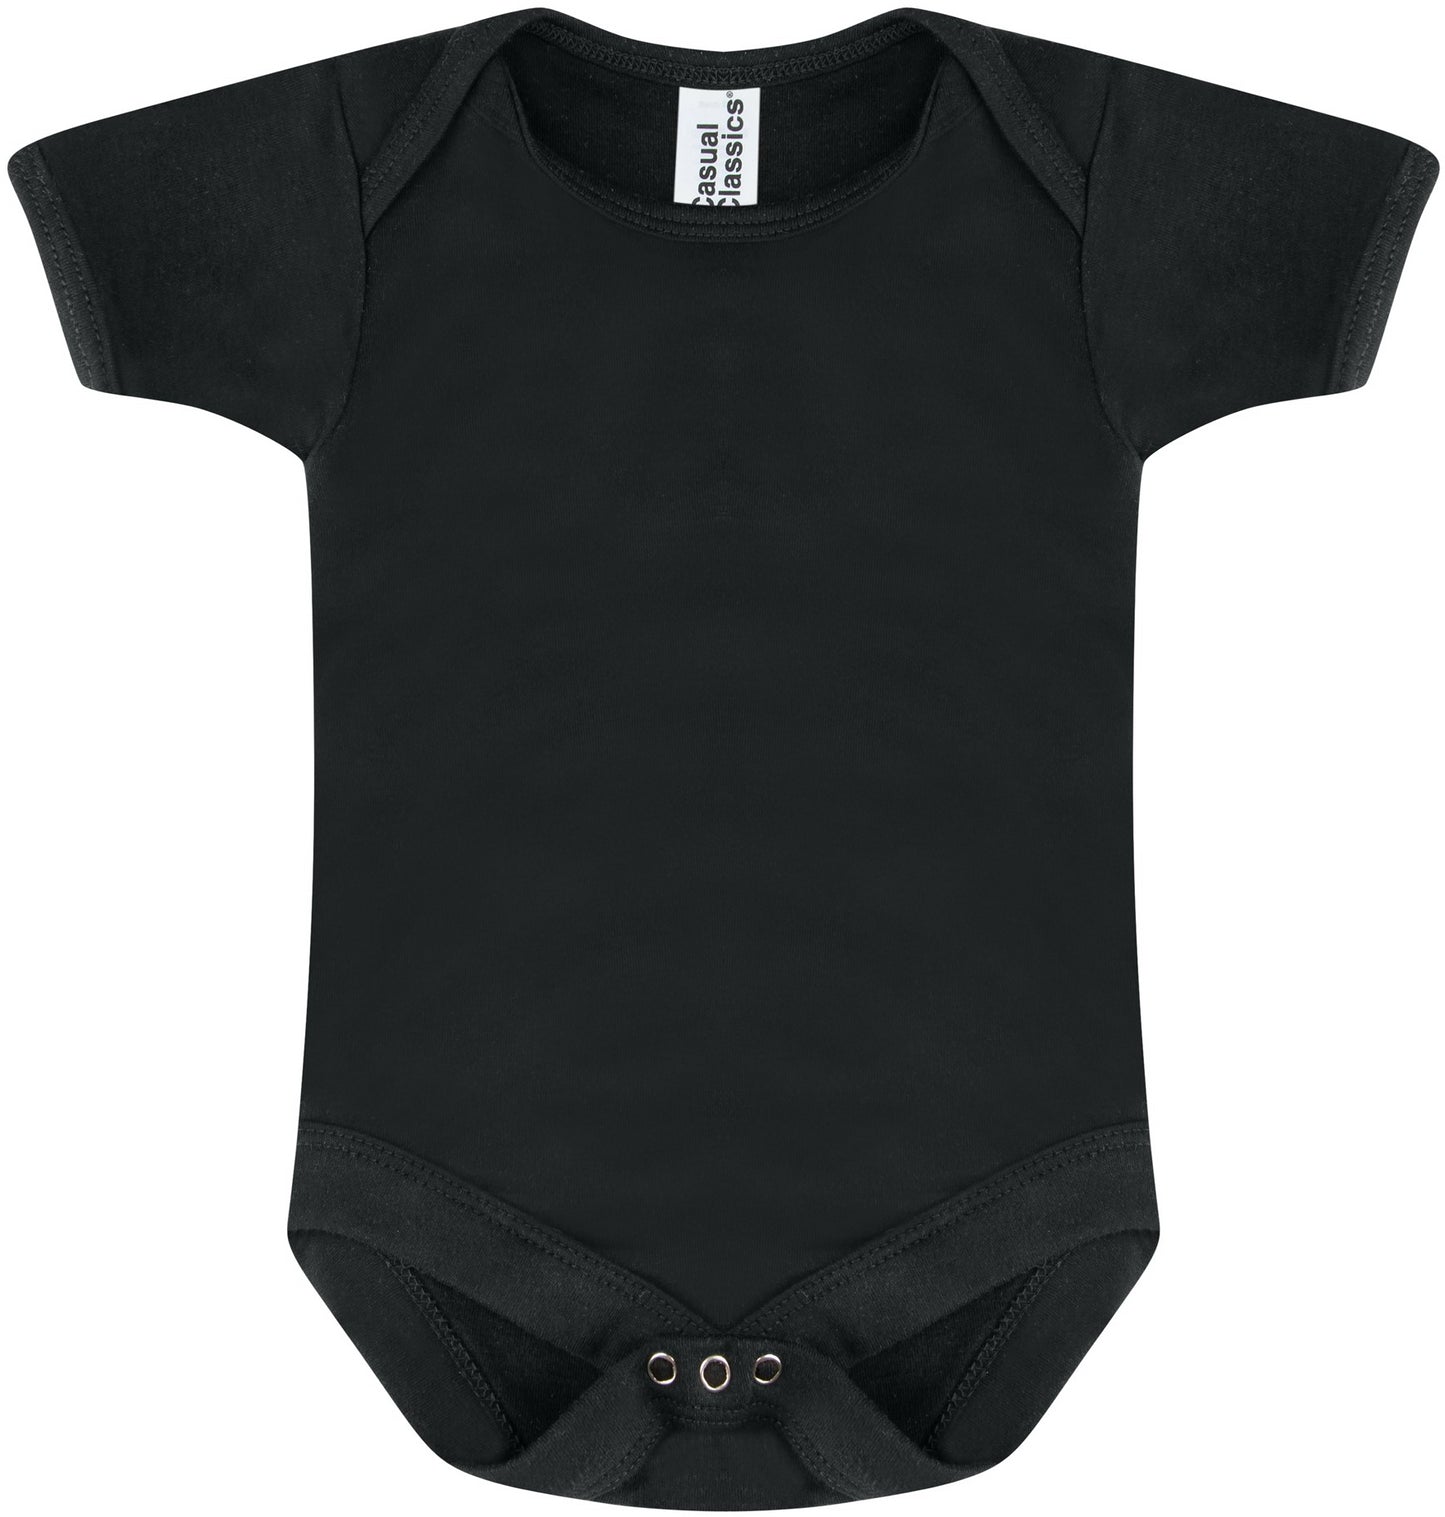 Casual Classic Baby Body Suit - Black